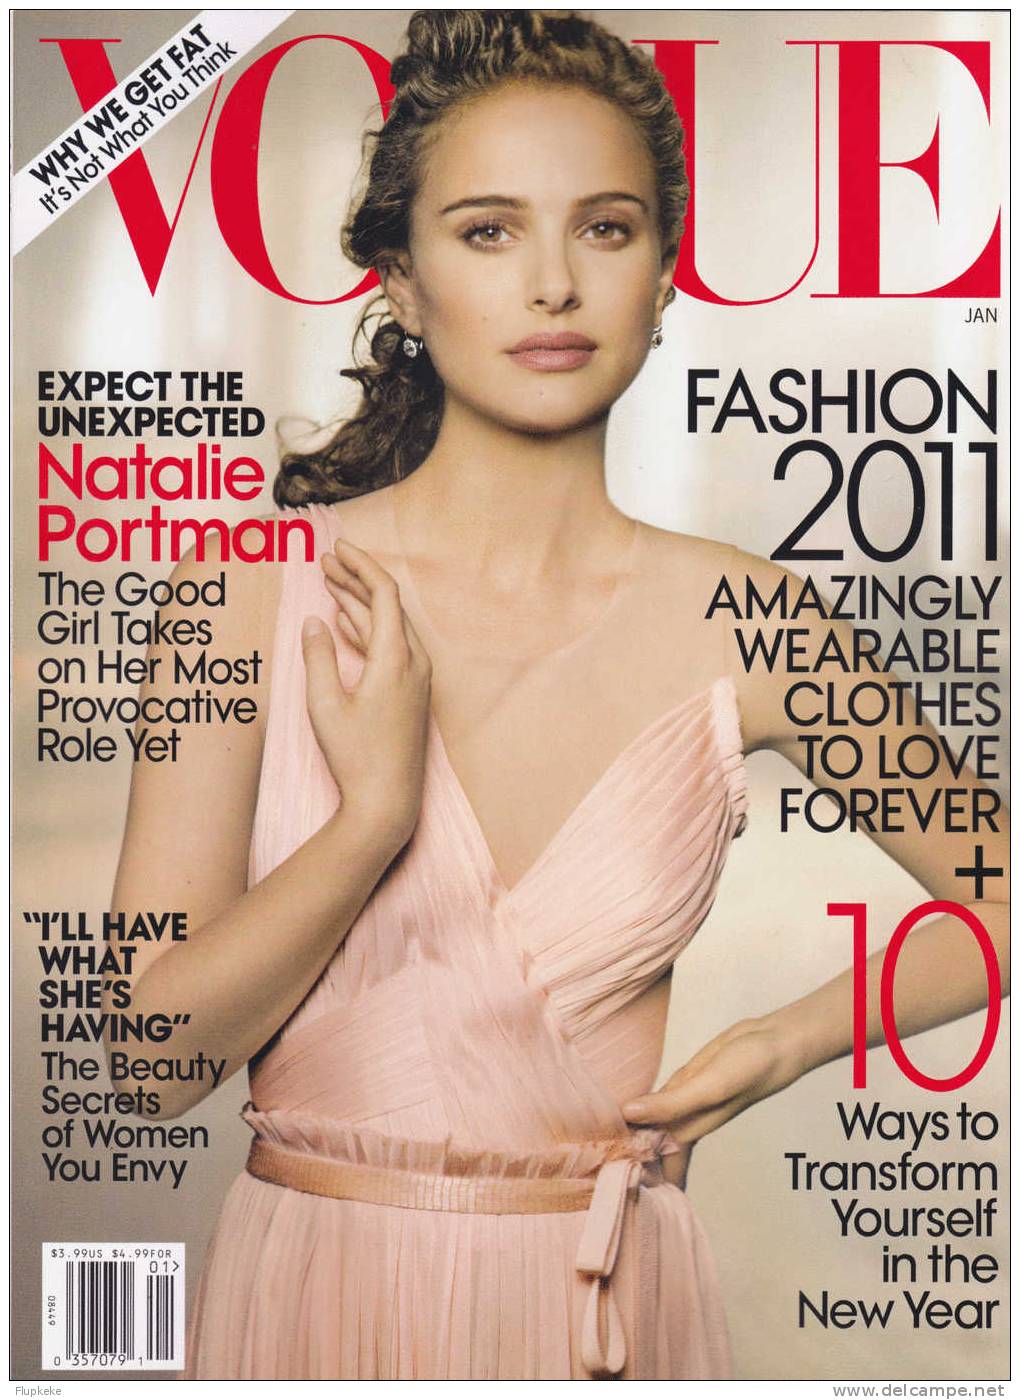 Vogue January 2011 Cover Natalie Portman Expect The Unexpected The Good Girl Takes On Her Most Provocative Role Yet - Divertissement